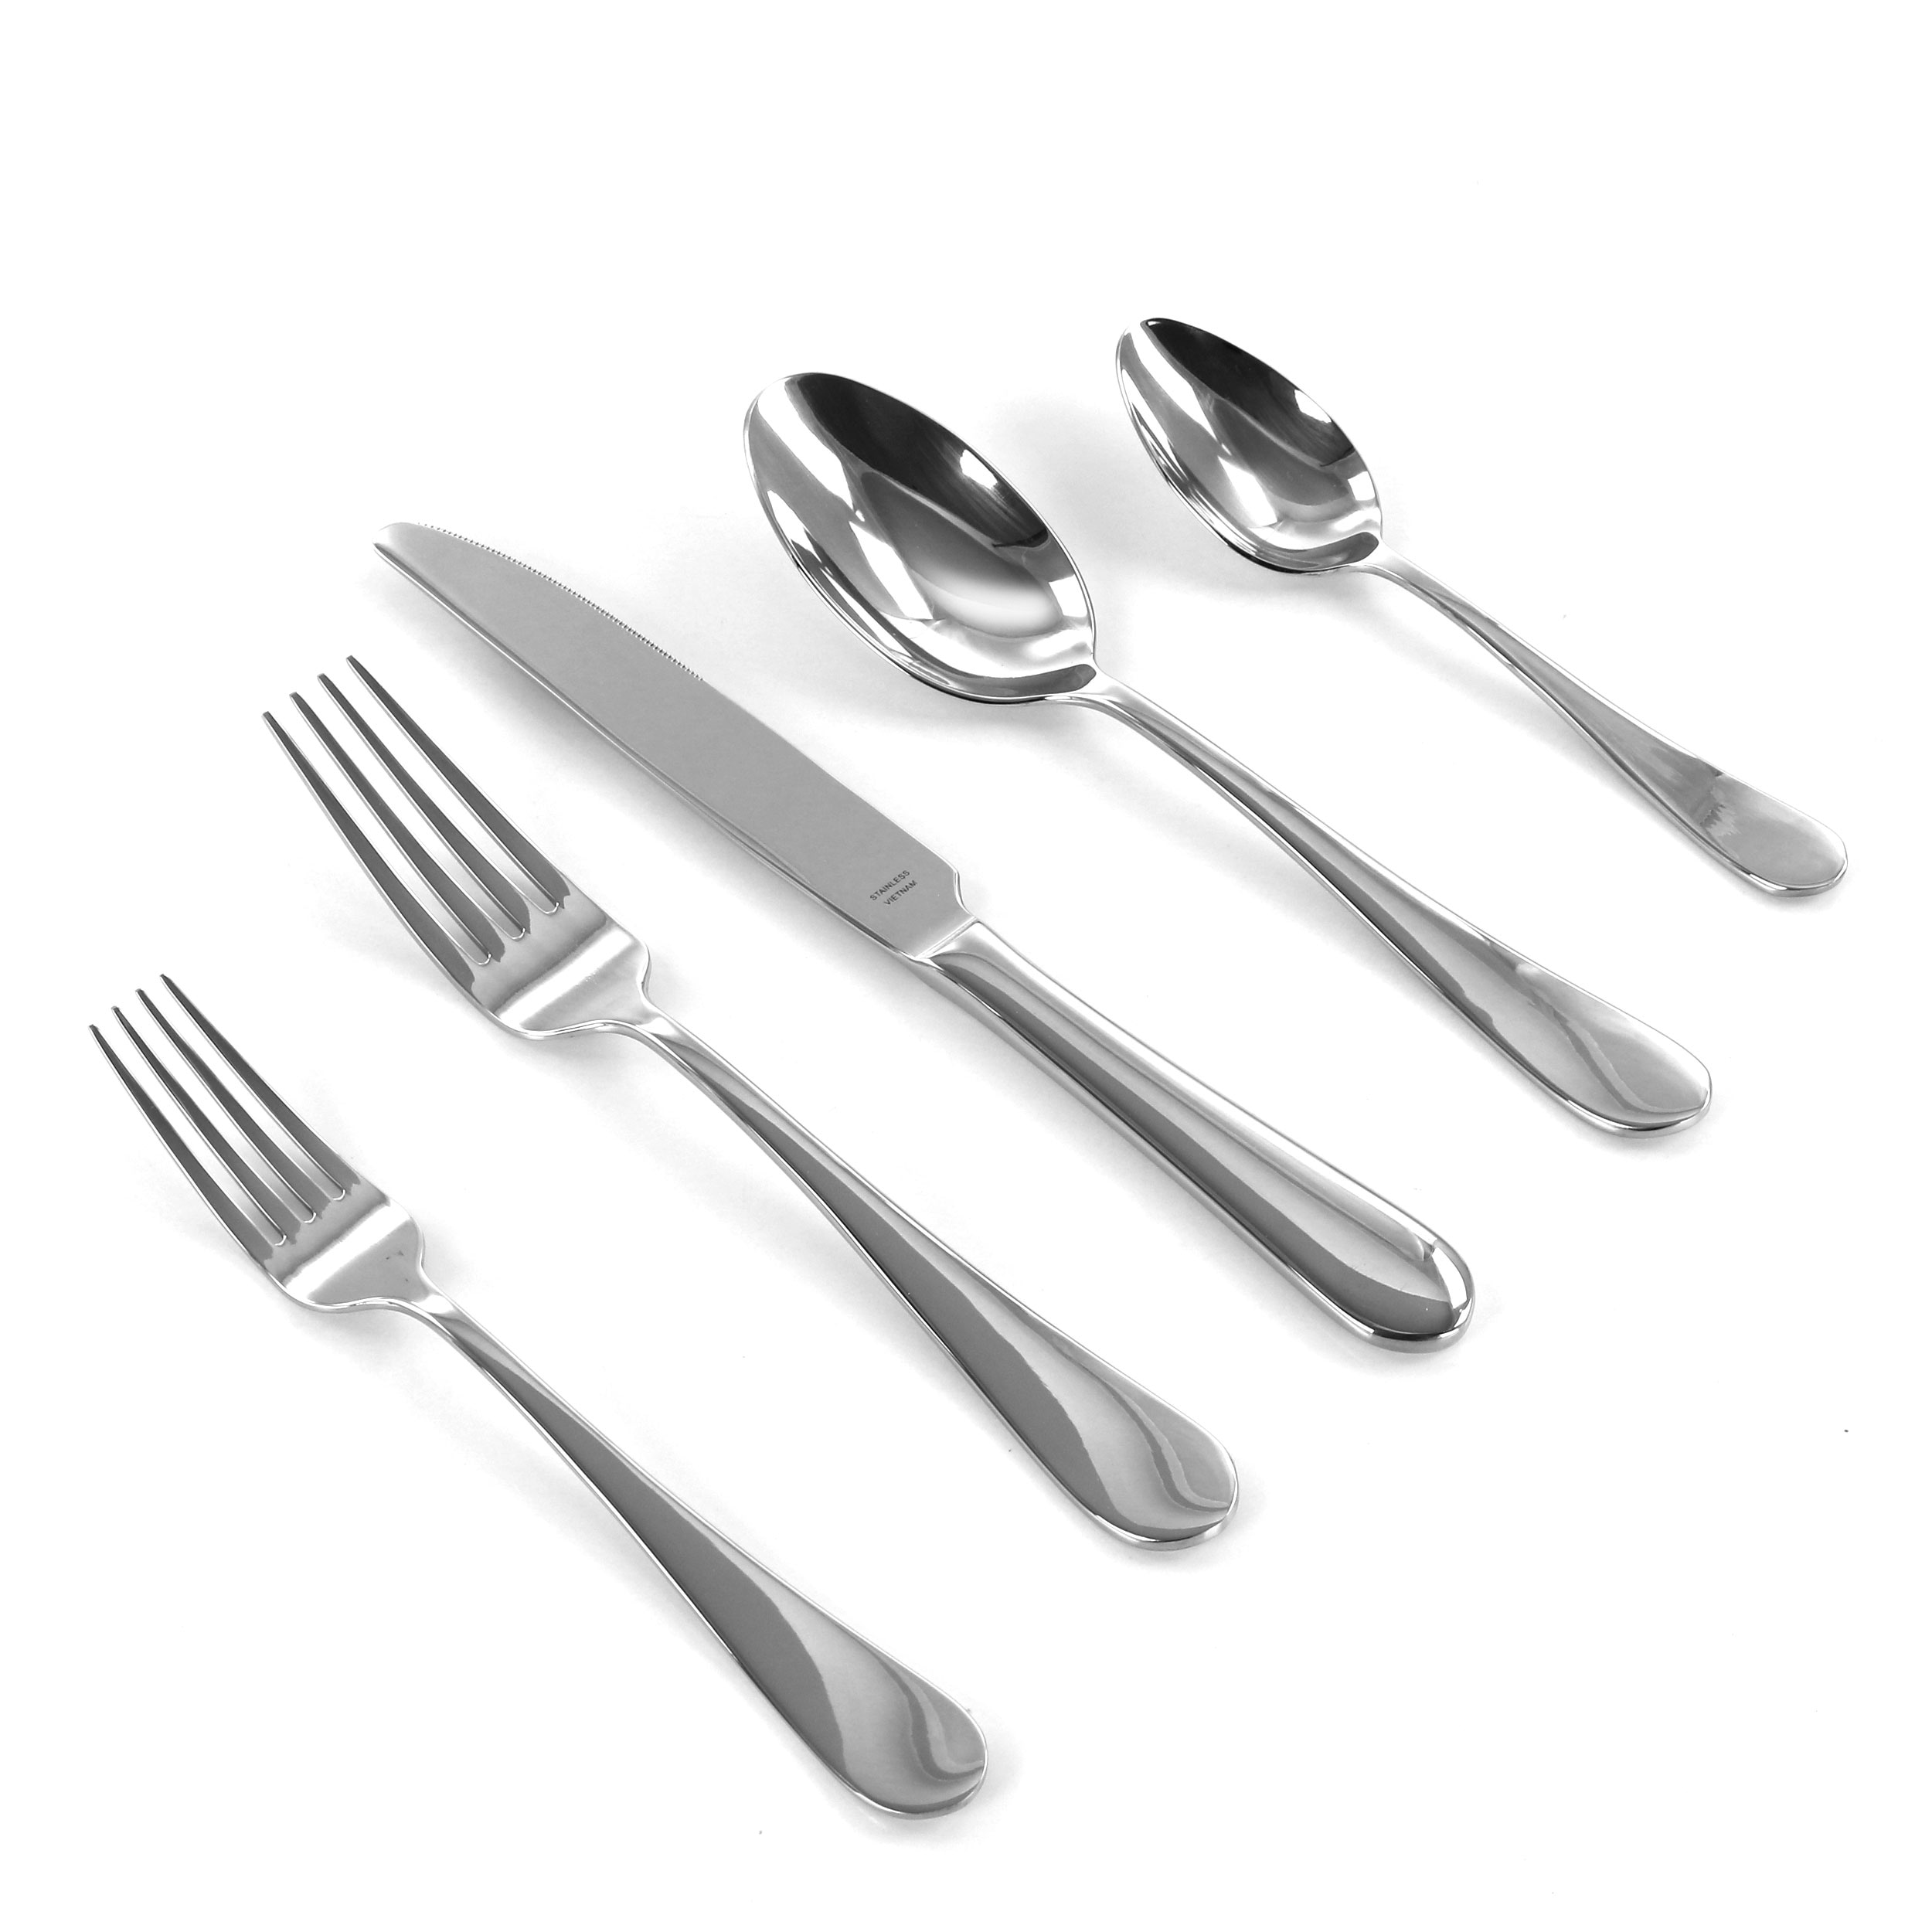 https://ak1.ostkcdn.com/images/products/is/images/direct/07b1122df75a69759d25f3dcf6297486a63f73bf/Martha-Stewart-Sutton-20-Piece-Stainless-Steel-Flatware-Set.jpg